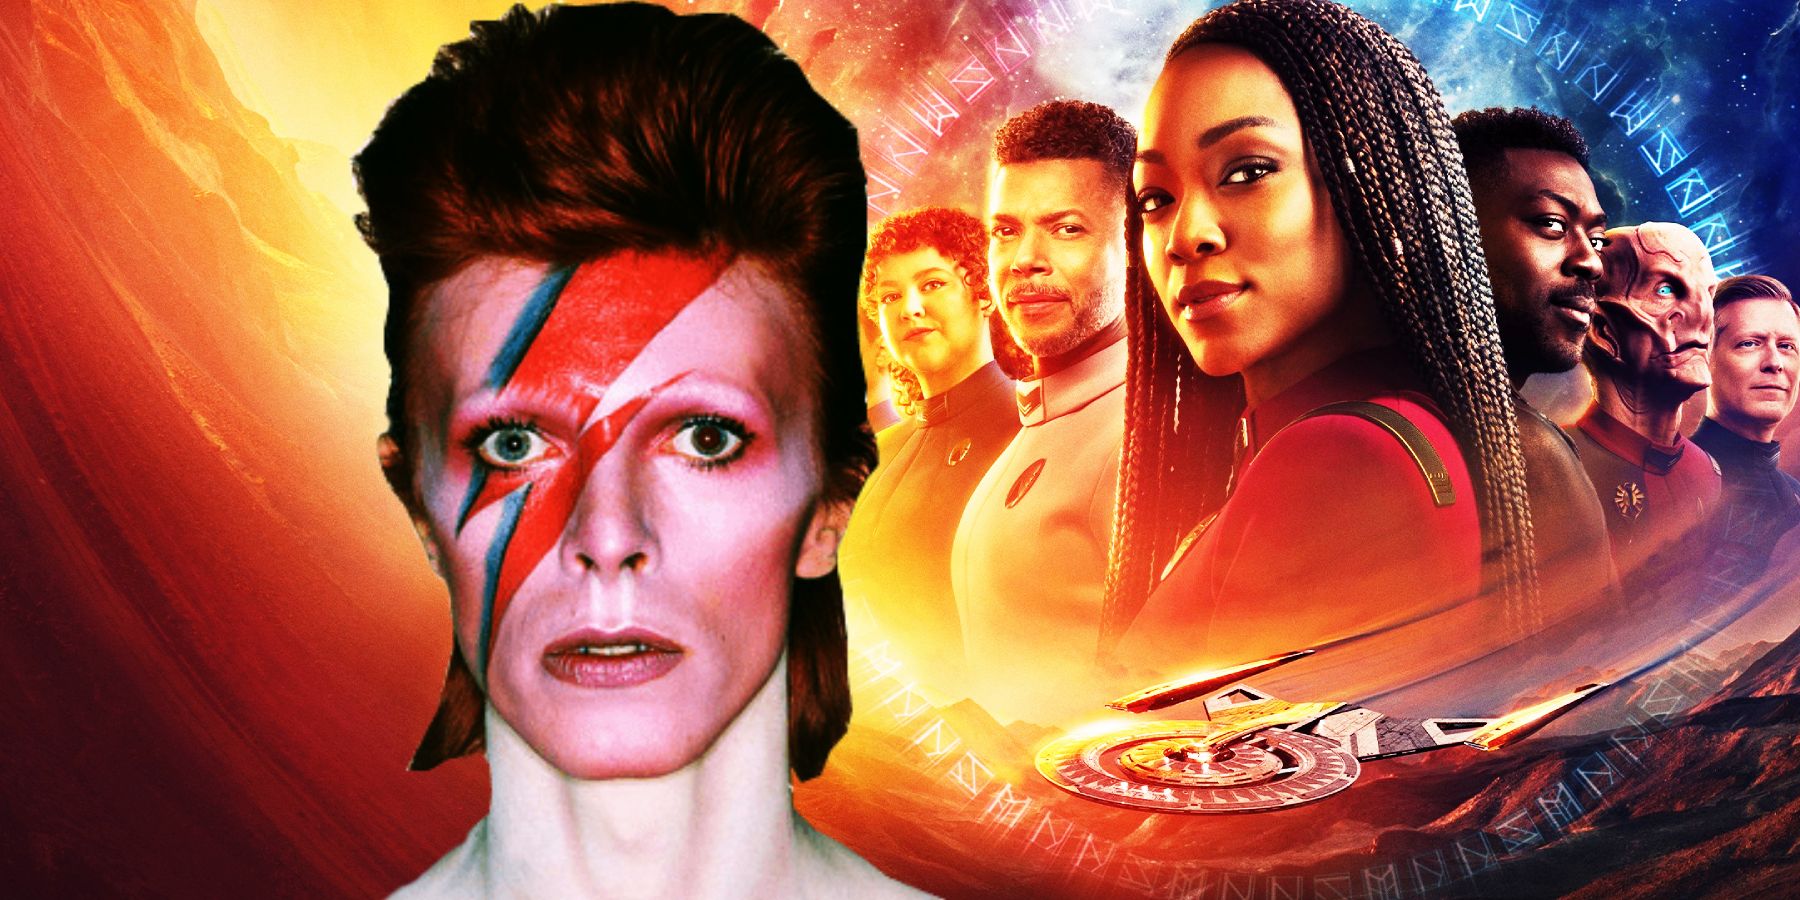 David Bowie from the cover of Aladdin Sane and the cast of Star Trek: Discovery